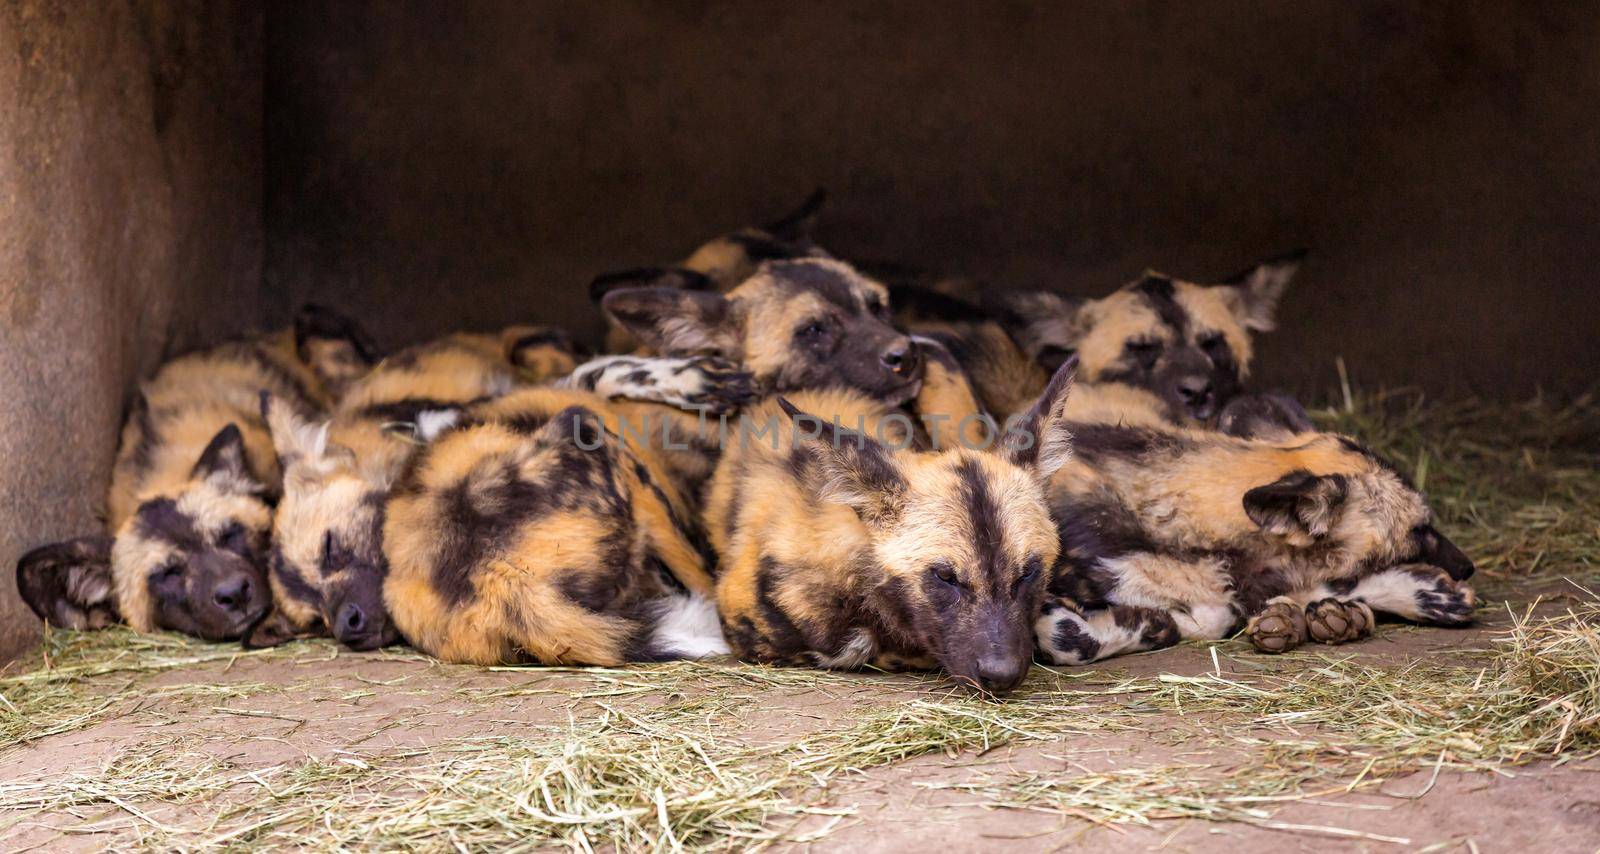 A group of African painted dogs gather together resting in a cave